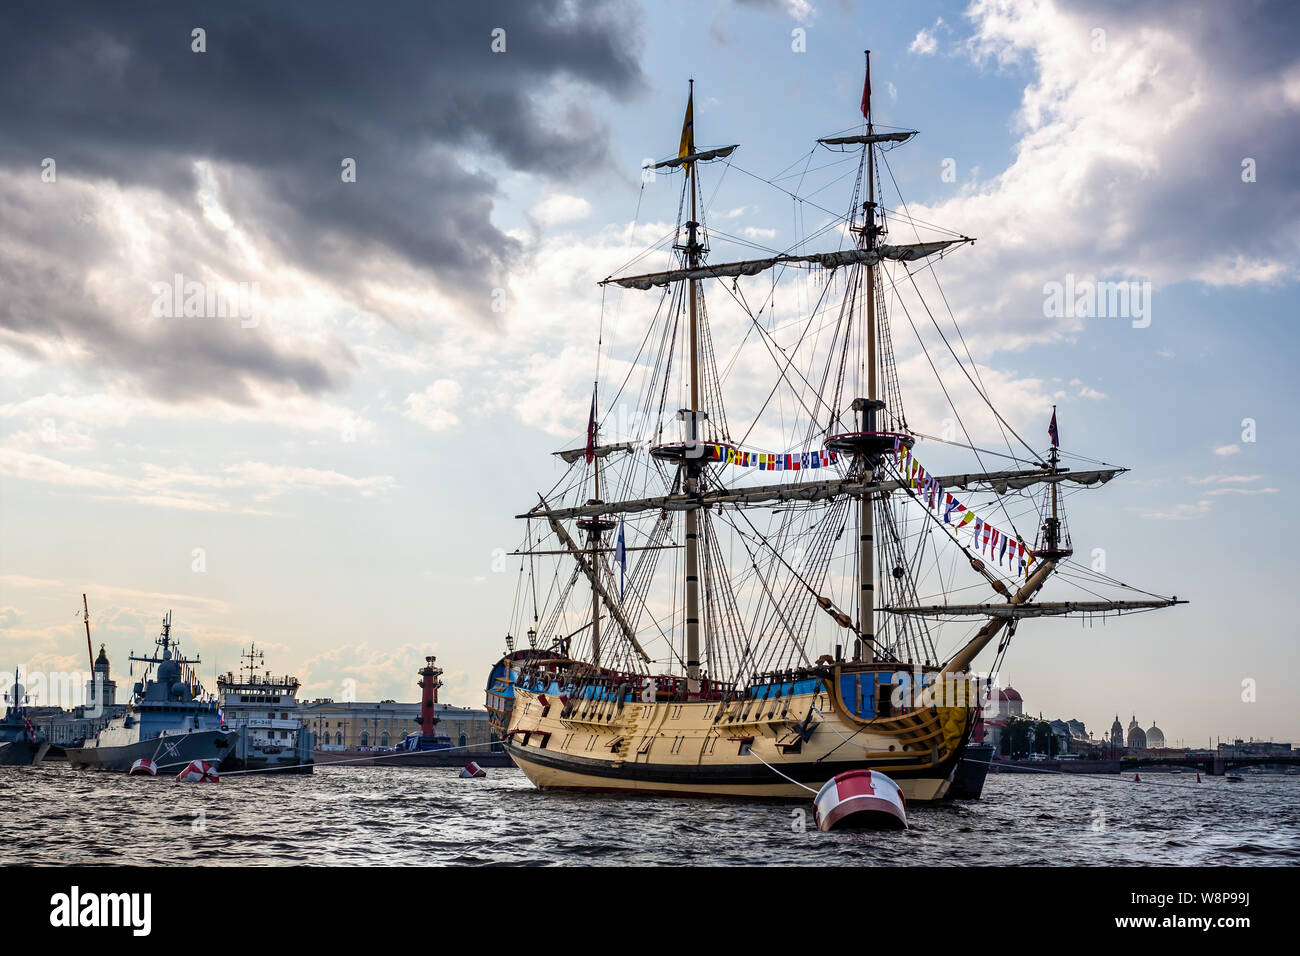 Three masted yellow wooden Tall Ship on the River Neva with Peter and Paul Cathedral in background in St Petersburg, Russia on 23 July 2019 Stock Photo